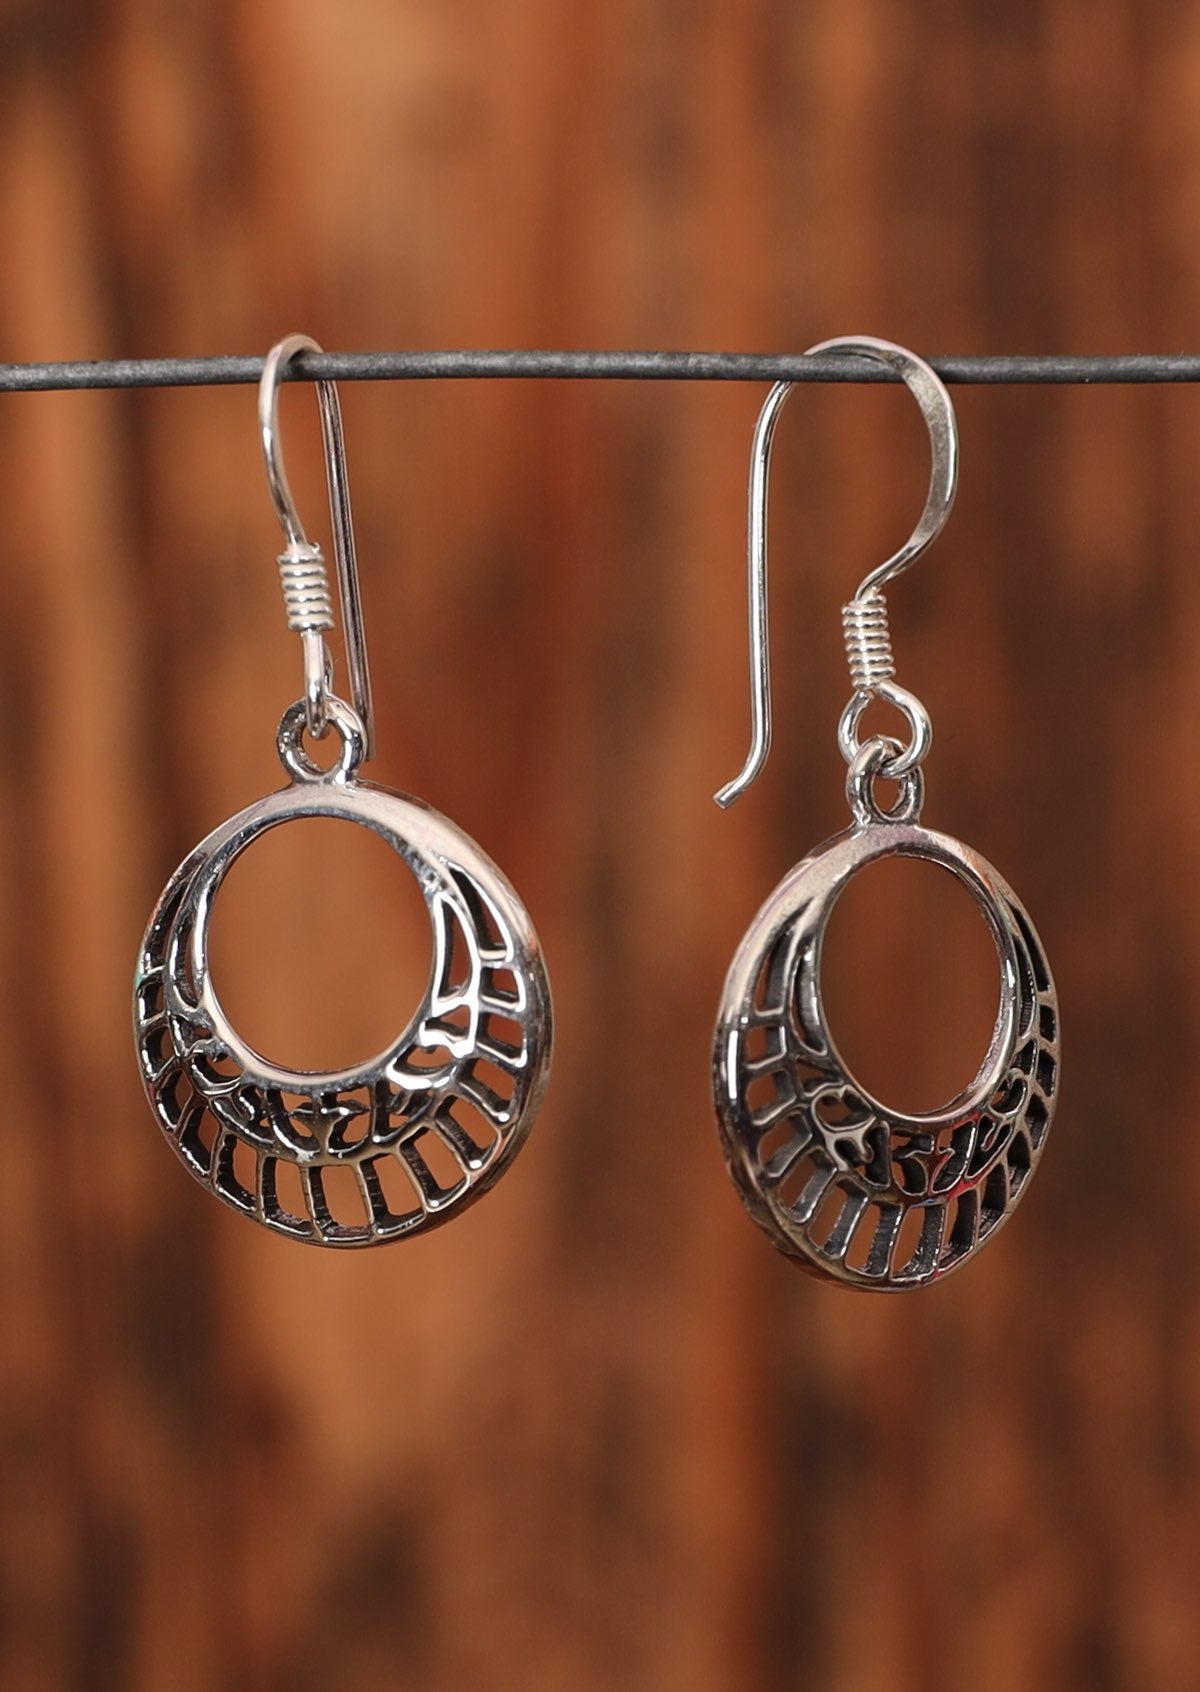 92.5% silver disk earrings with pattern sit on a wire for display.